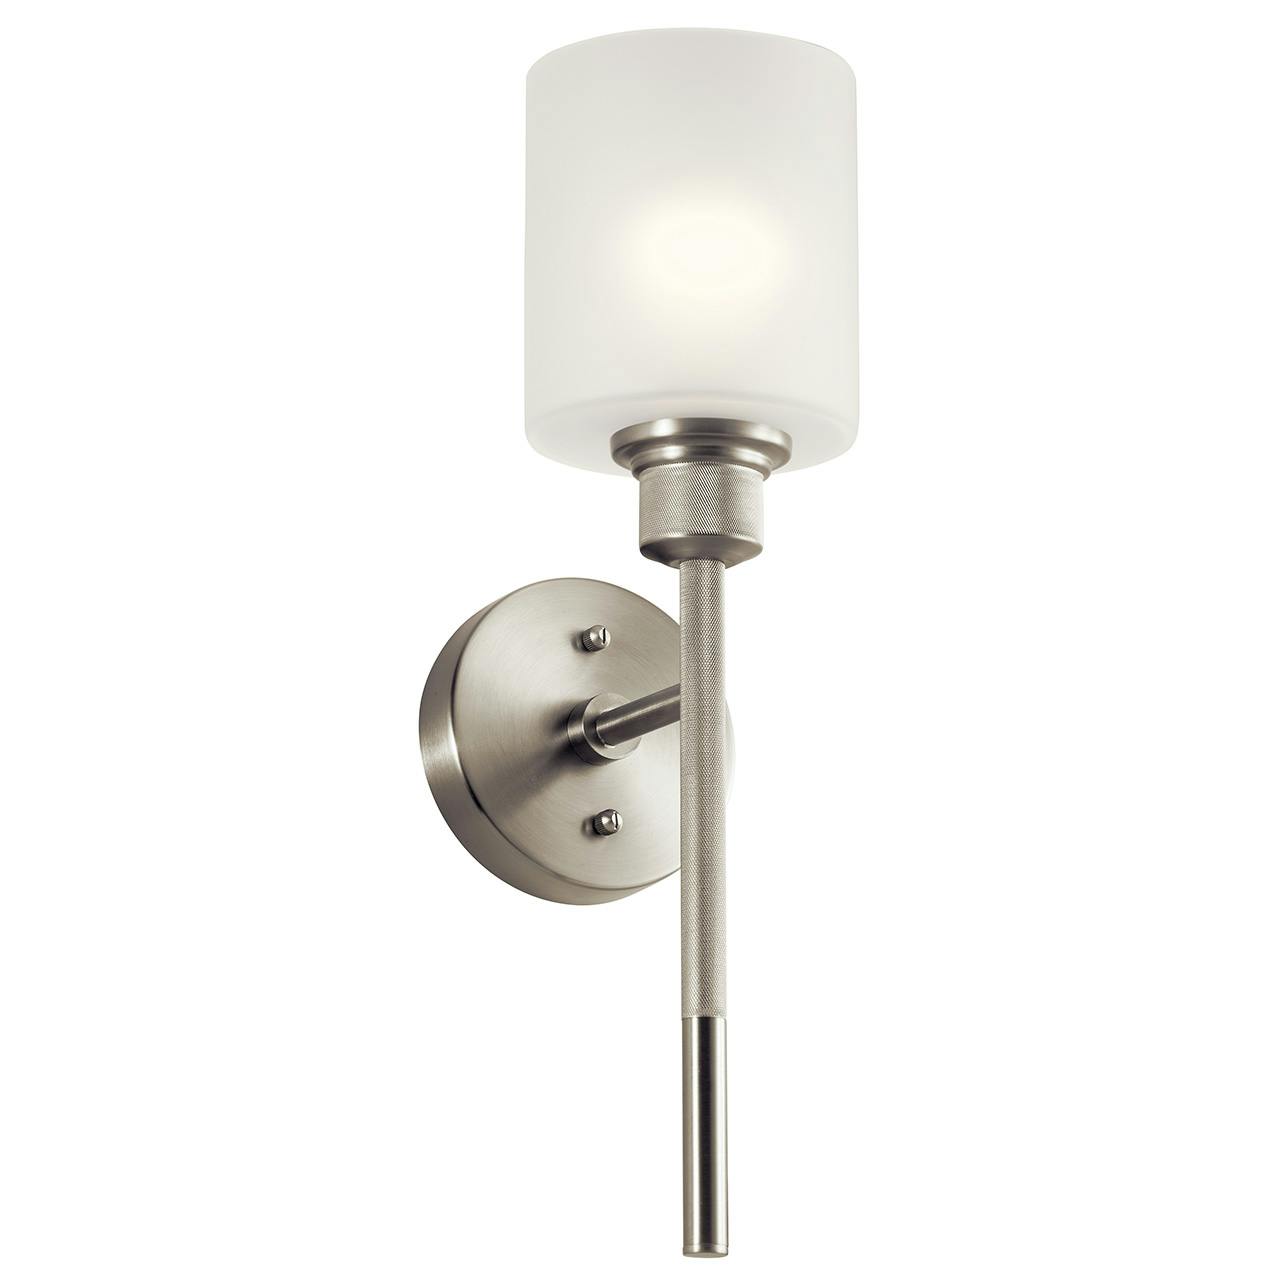 Lynn Haven 1 Light Sconce Brushed Nickel on a white background